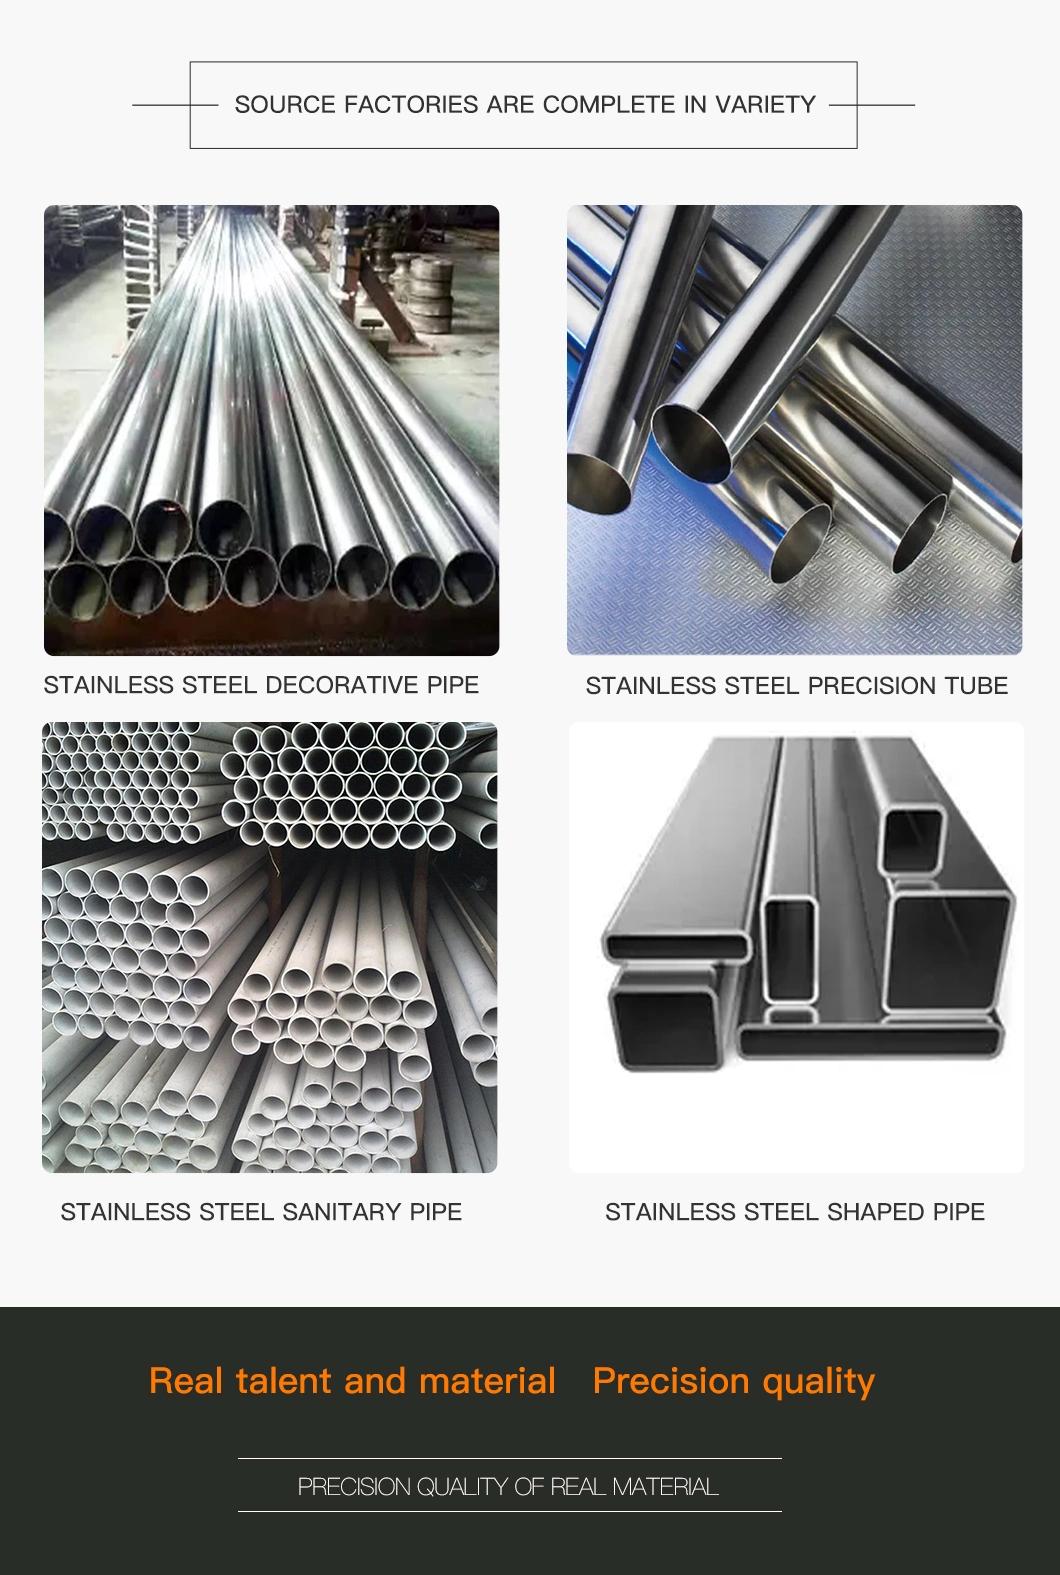 Stainless Steel Welding Pipe (TP304) with High Quality